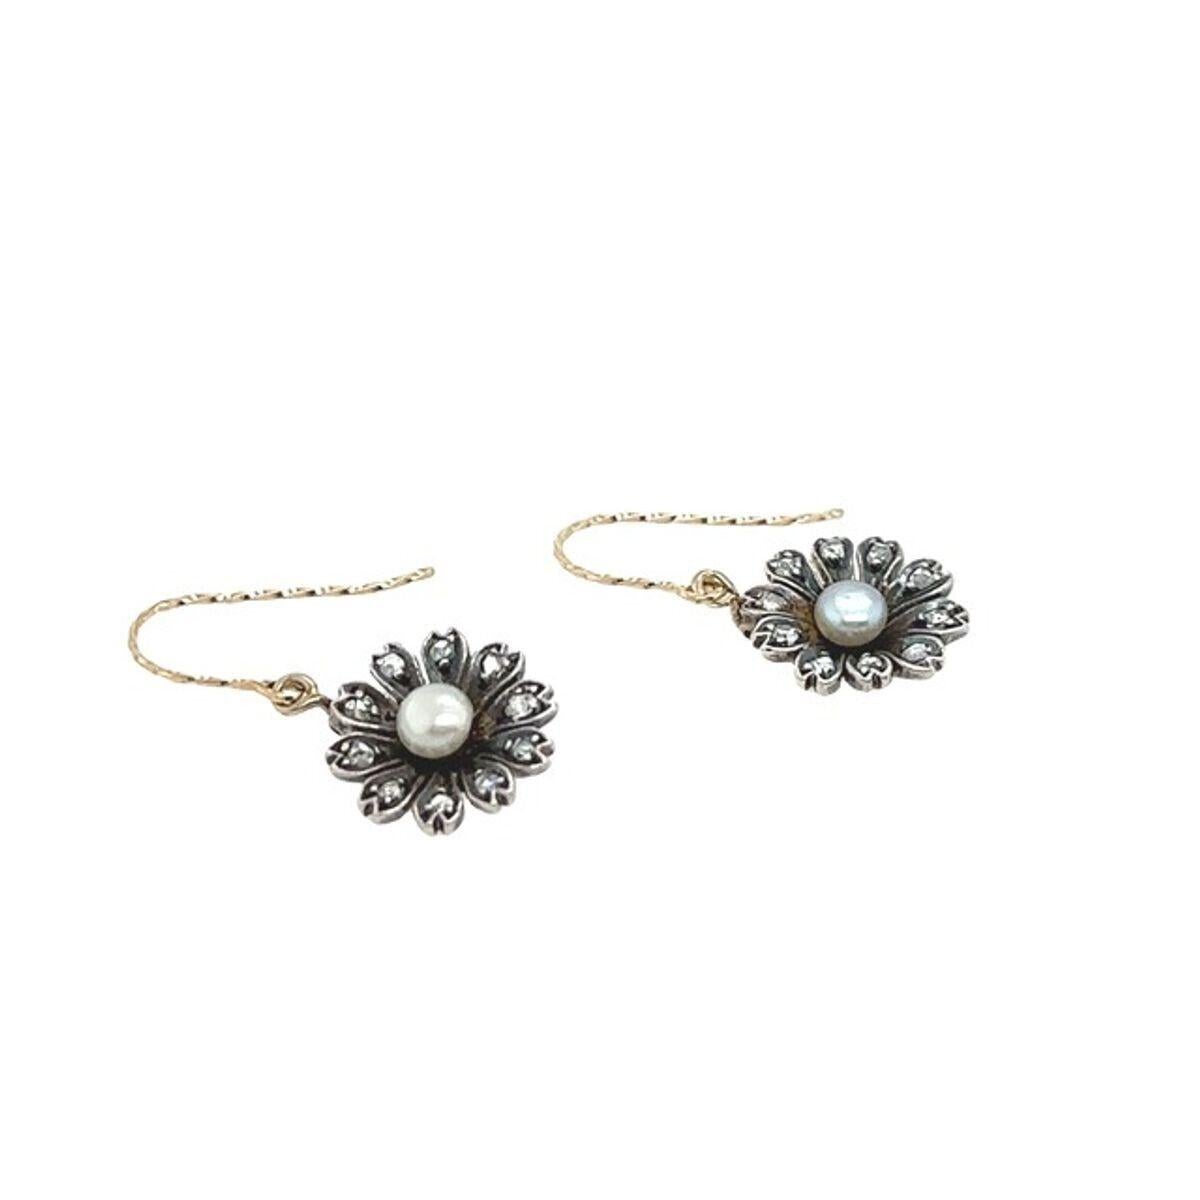 Round Cut Pearl & Diamond Earrings with Victorian Cut Diamonds in 9ct Yellow Gold & Silver